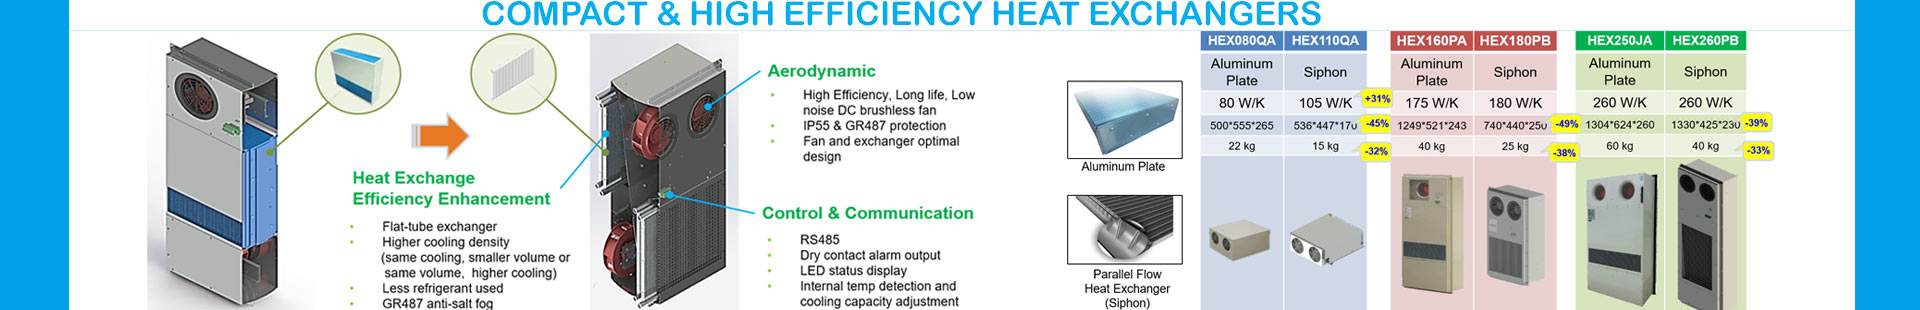 AIR TO AIR HEAT EXCHANGERS